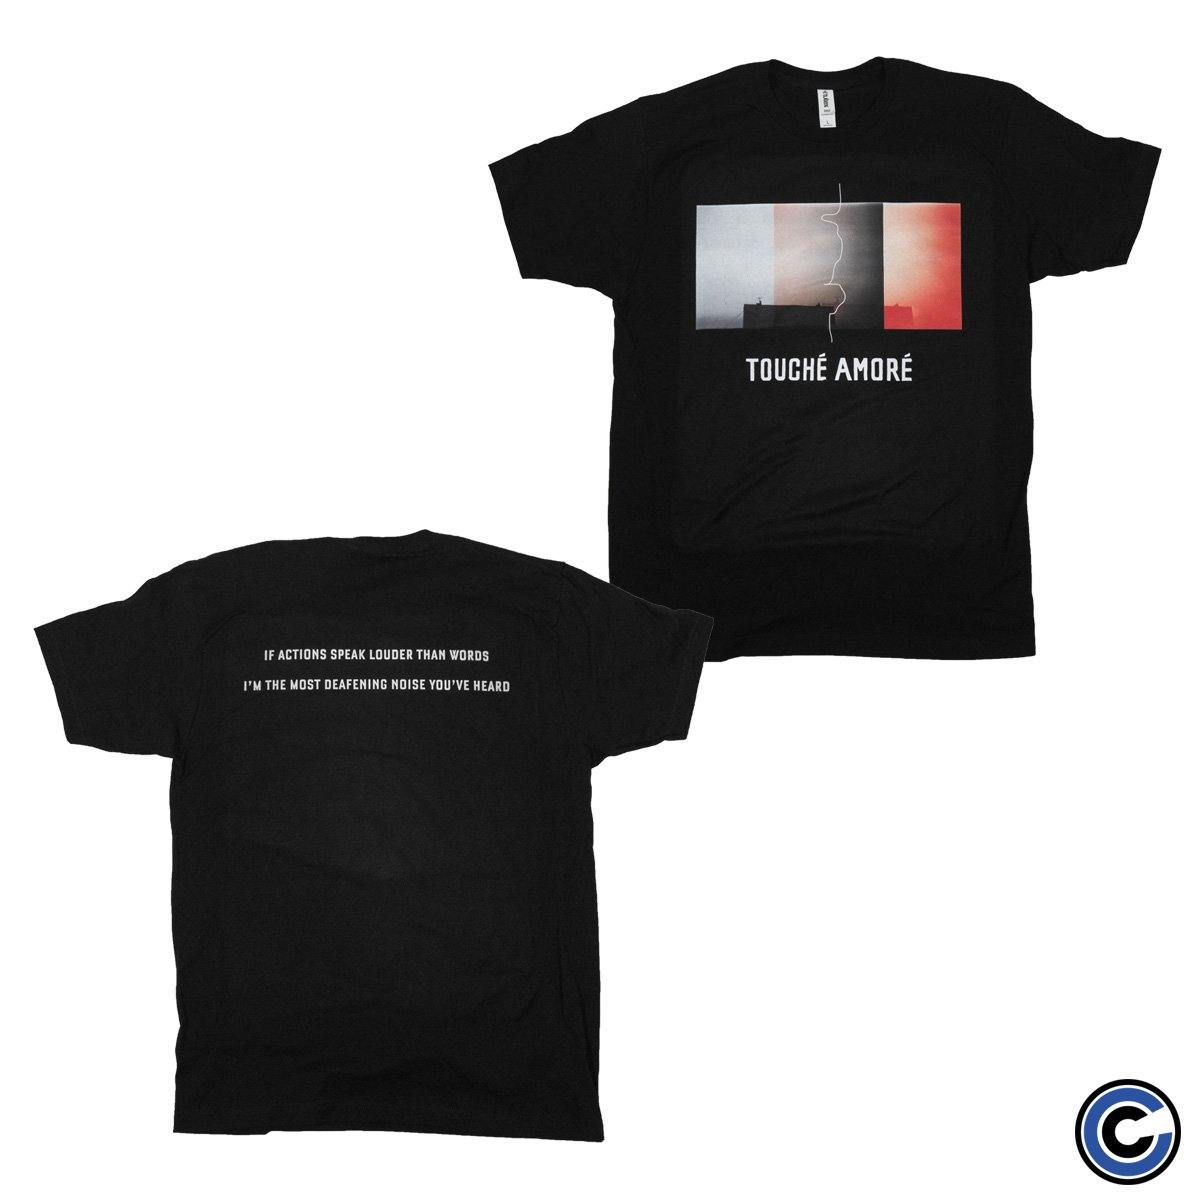 Buy – Touche Amore "Actions Speak Louder" Shirt – Band & Music Merch – Cold Cuts Merch